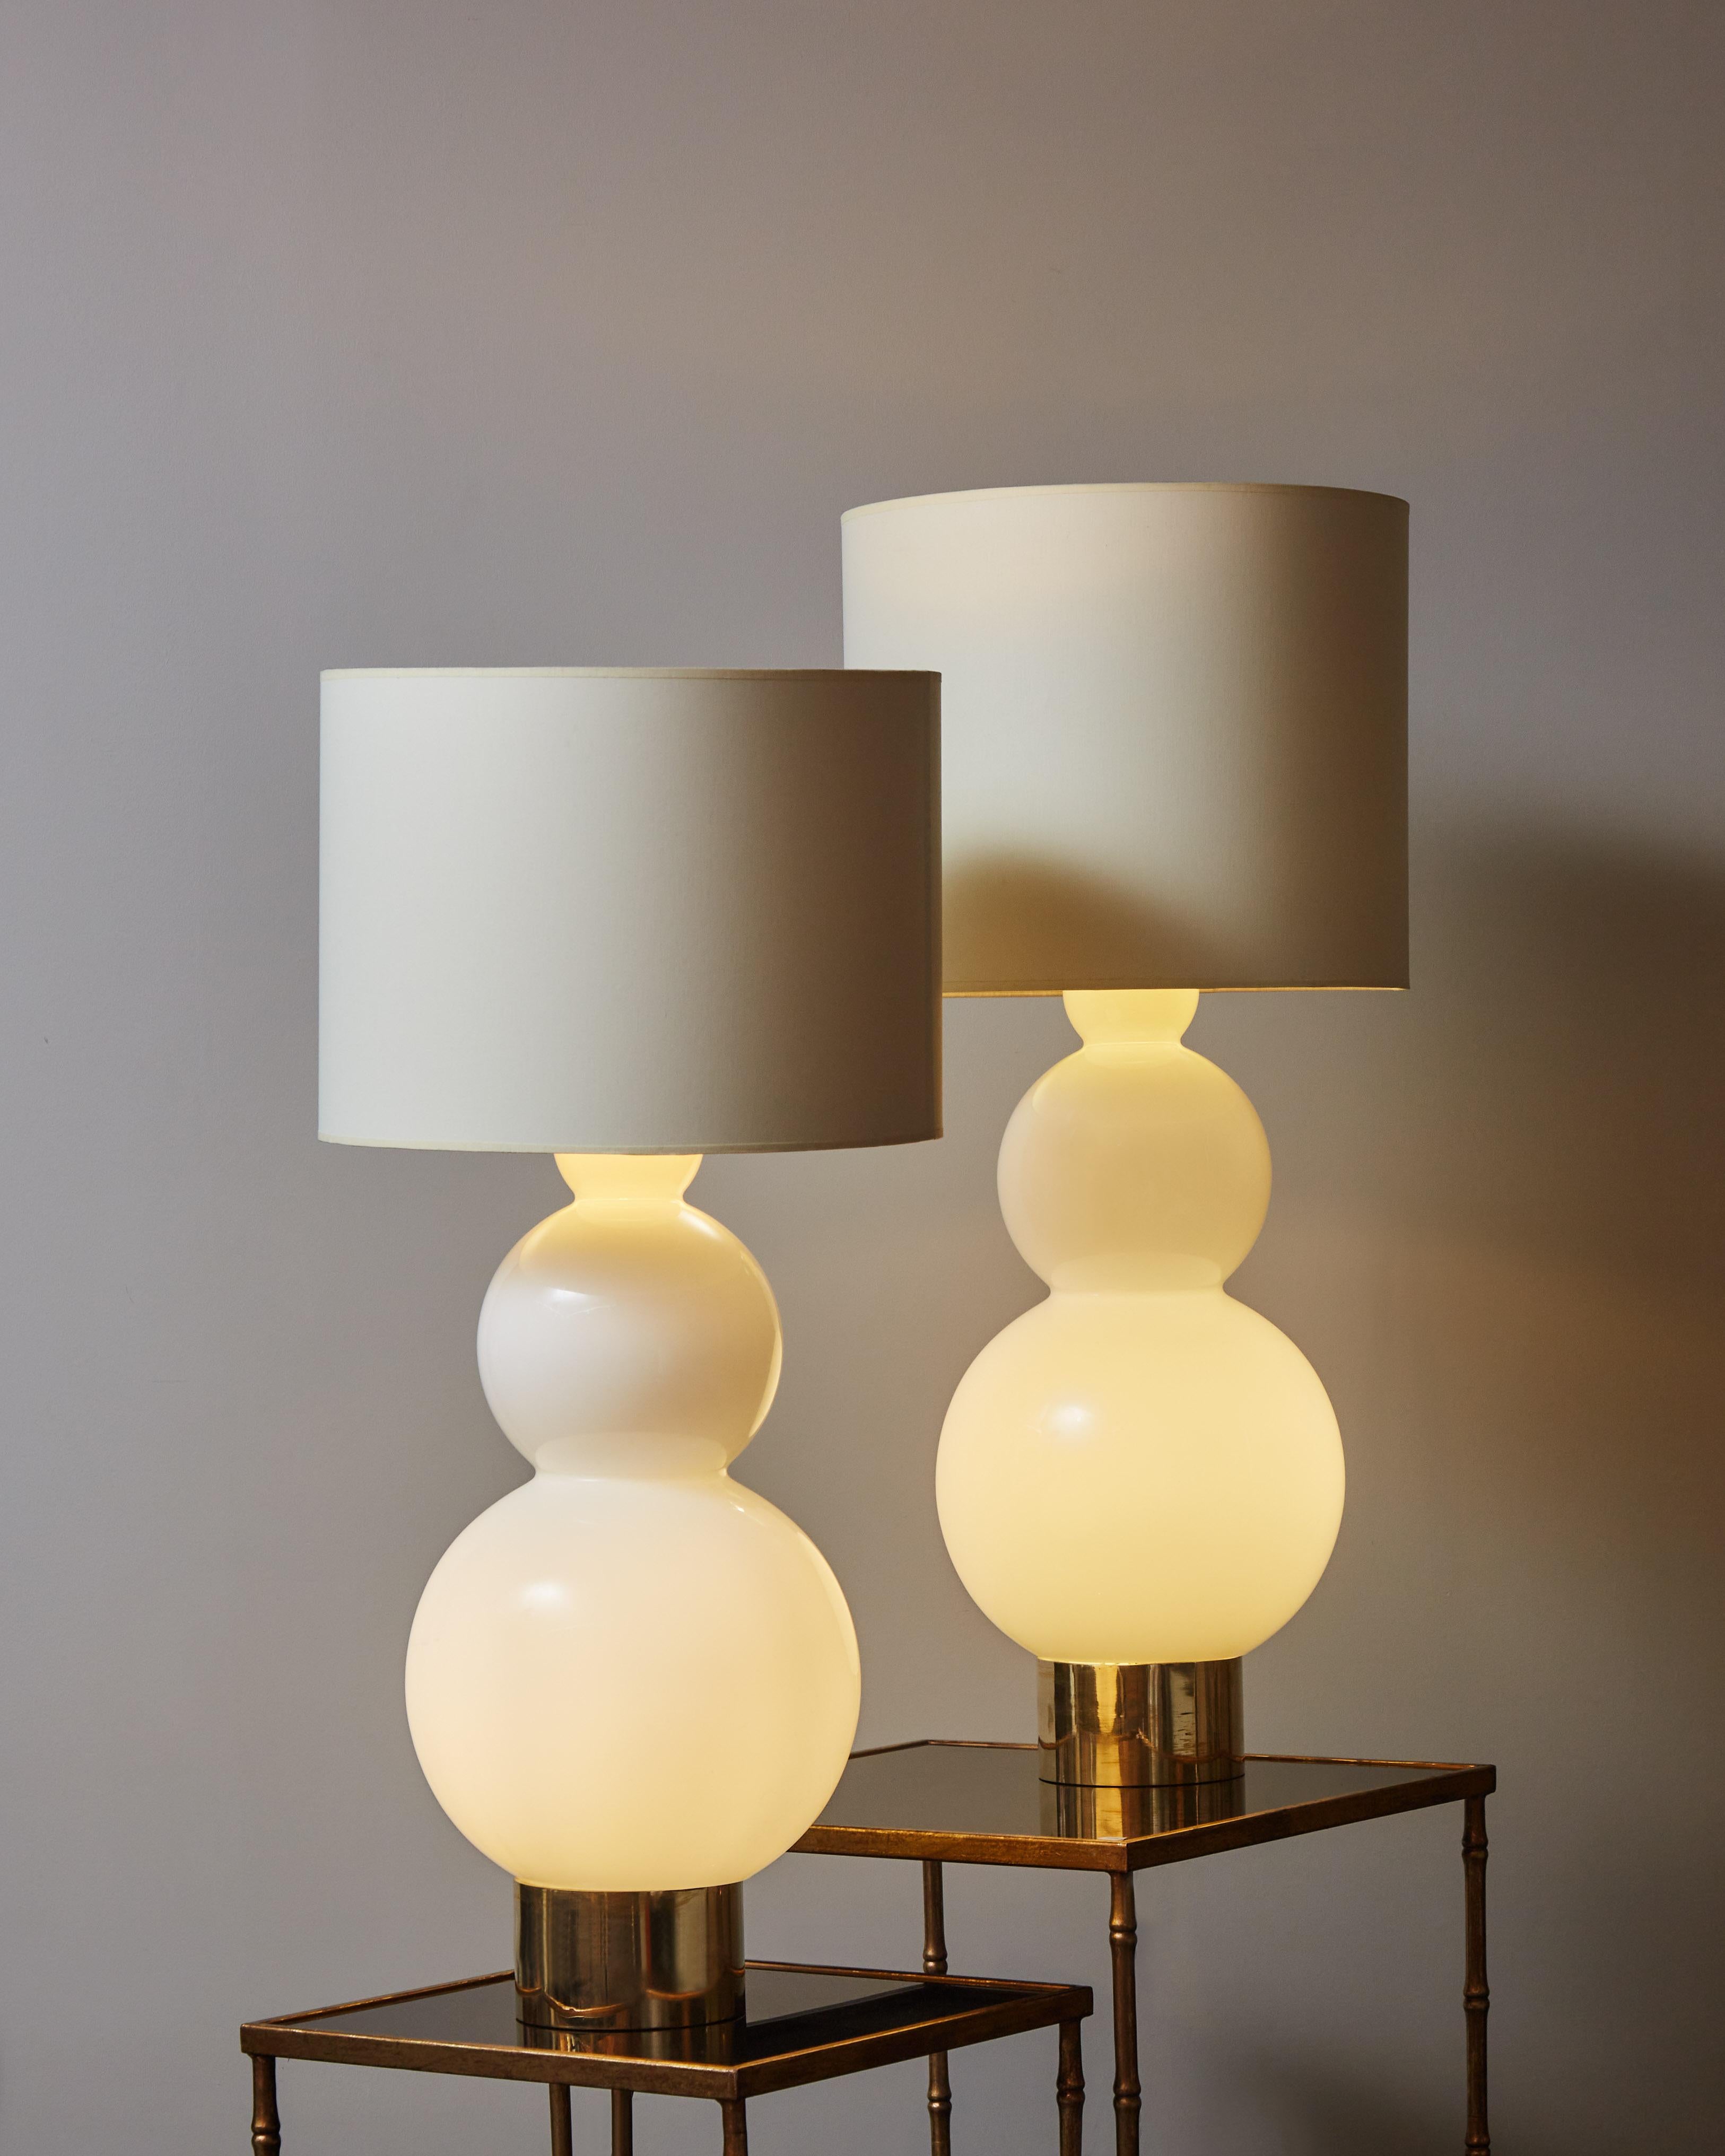 Pair of bubbly table lamps made of a single opaline glass piece with brass feet. Two lightbulbs inside the body of each lamp provide a smooth lighting in addition to the regular top bulb.